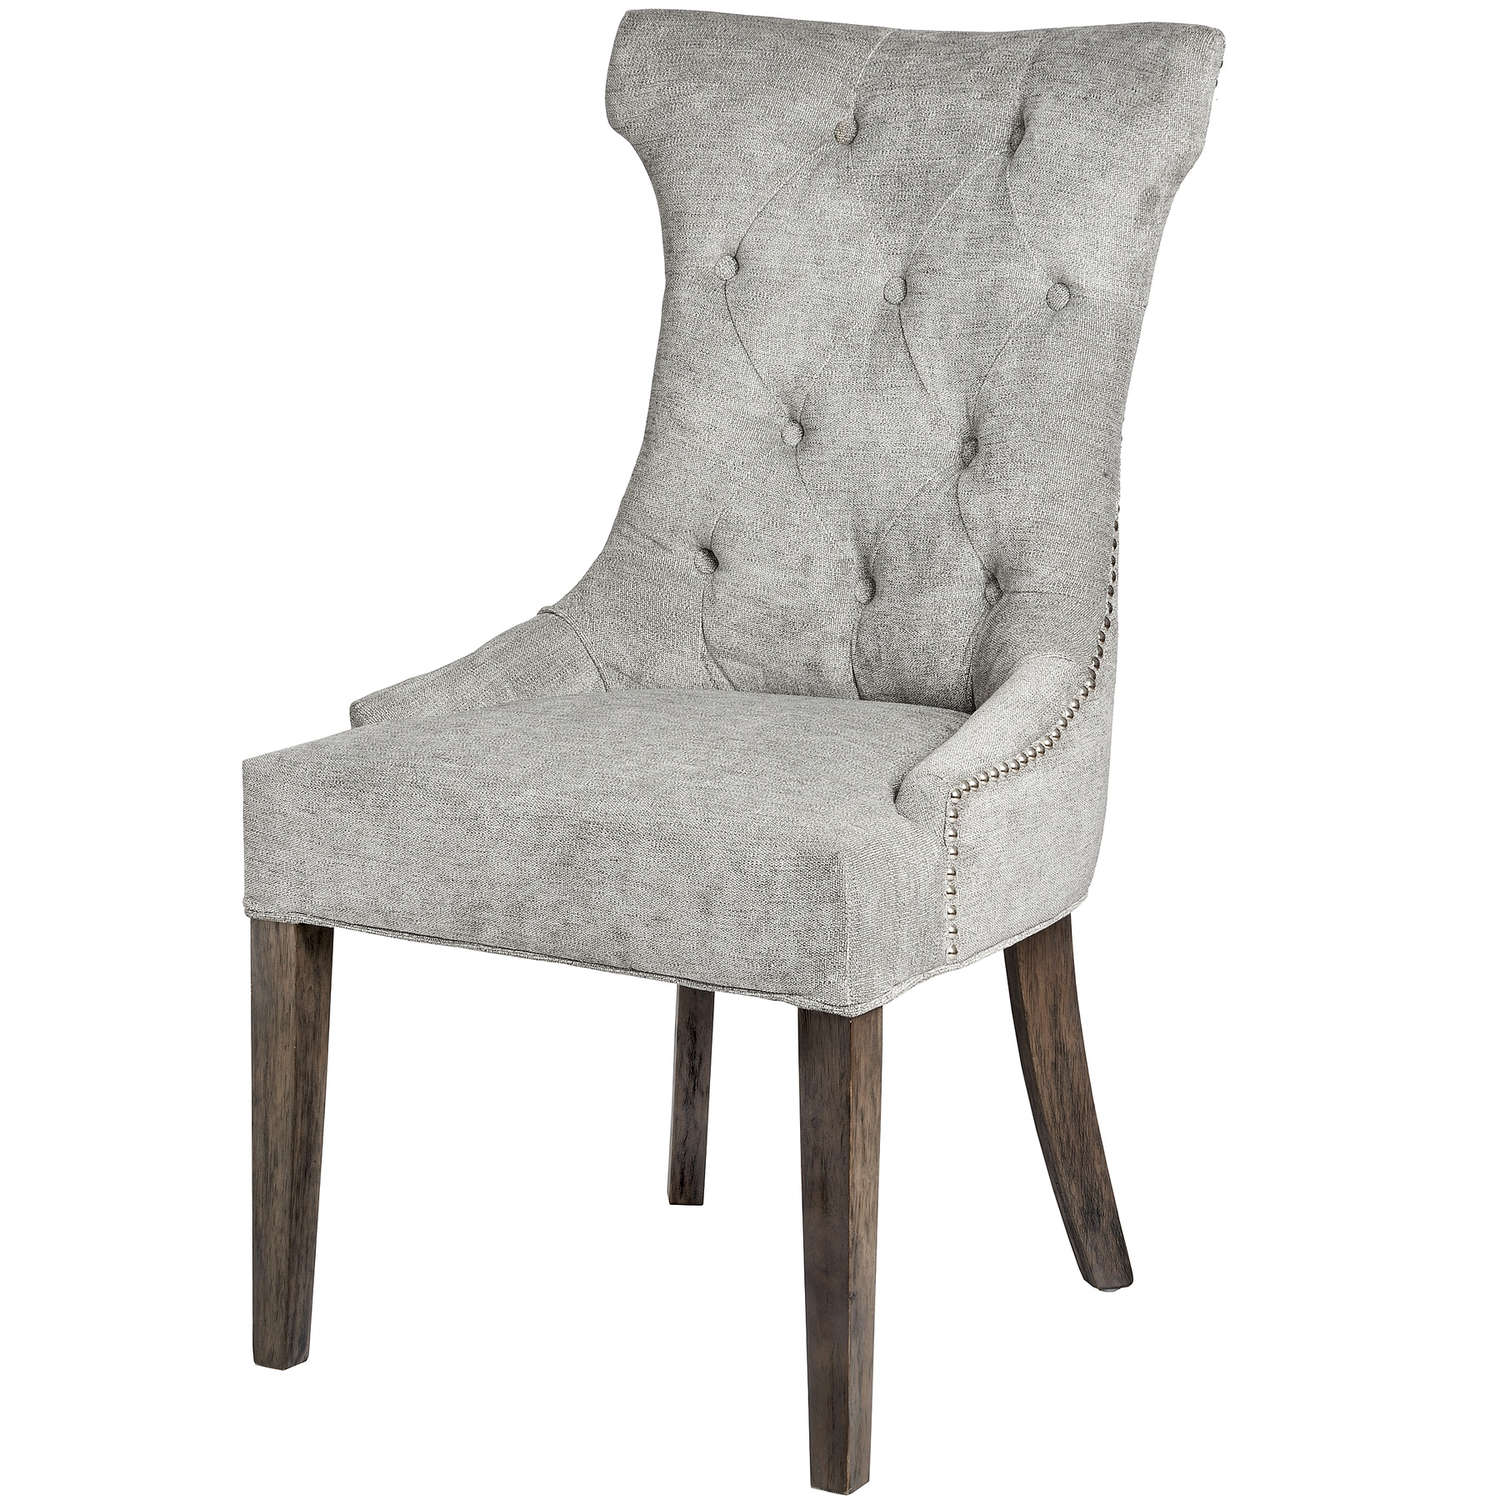 View Silver High Wing Ring Backed Dining Chair information